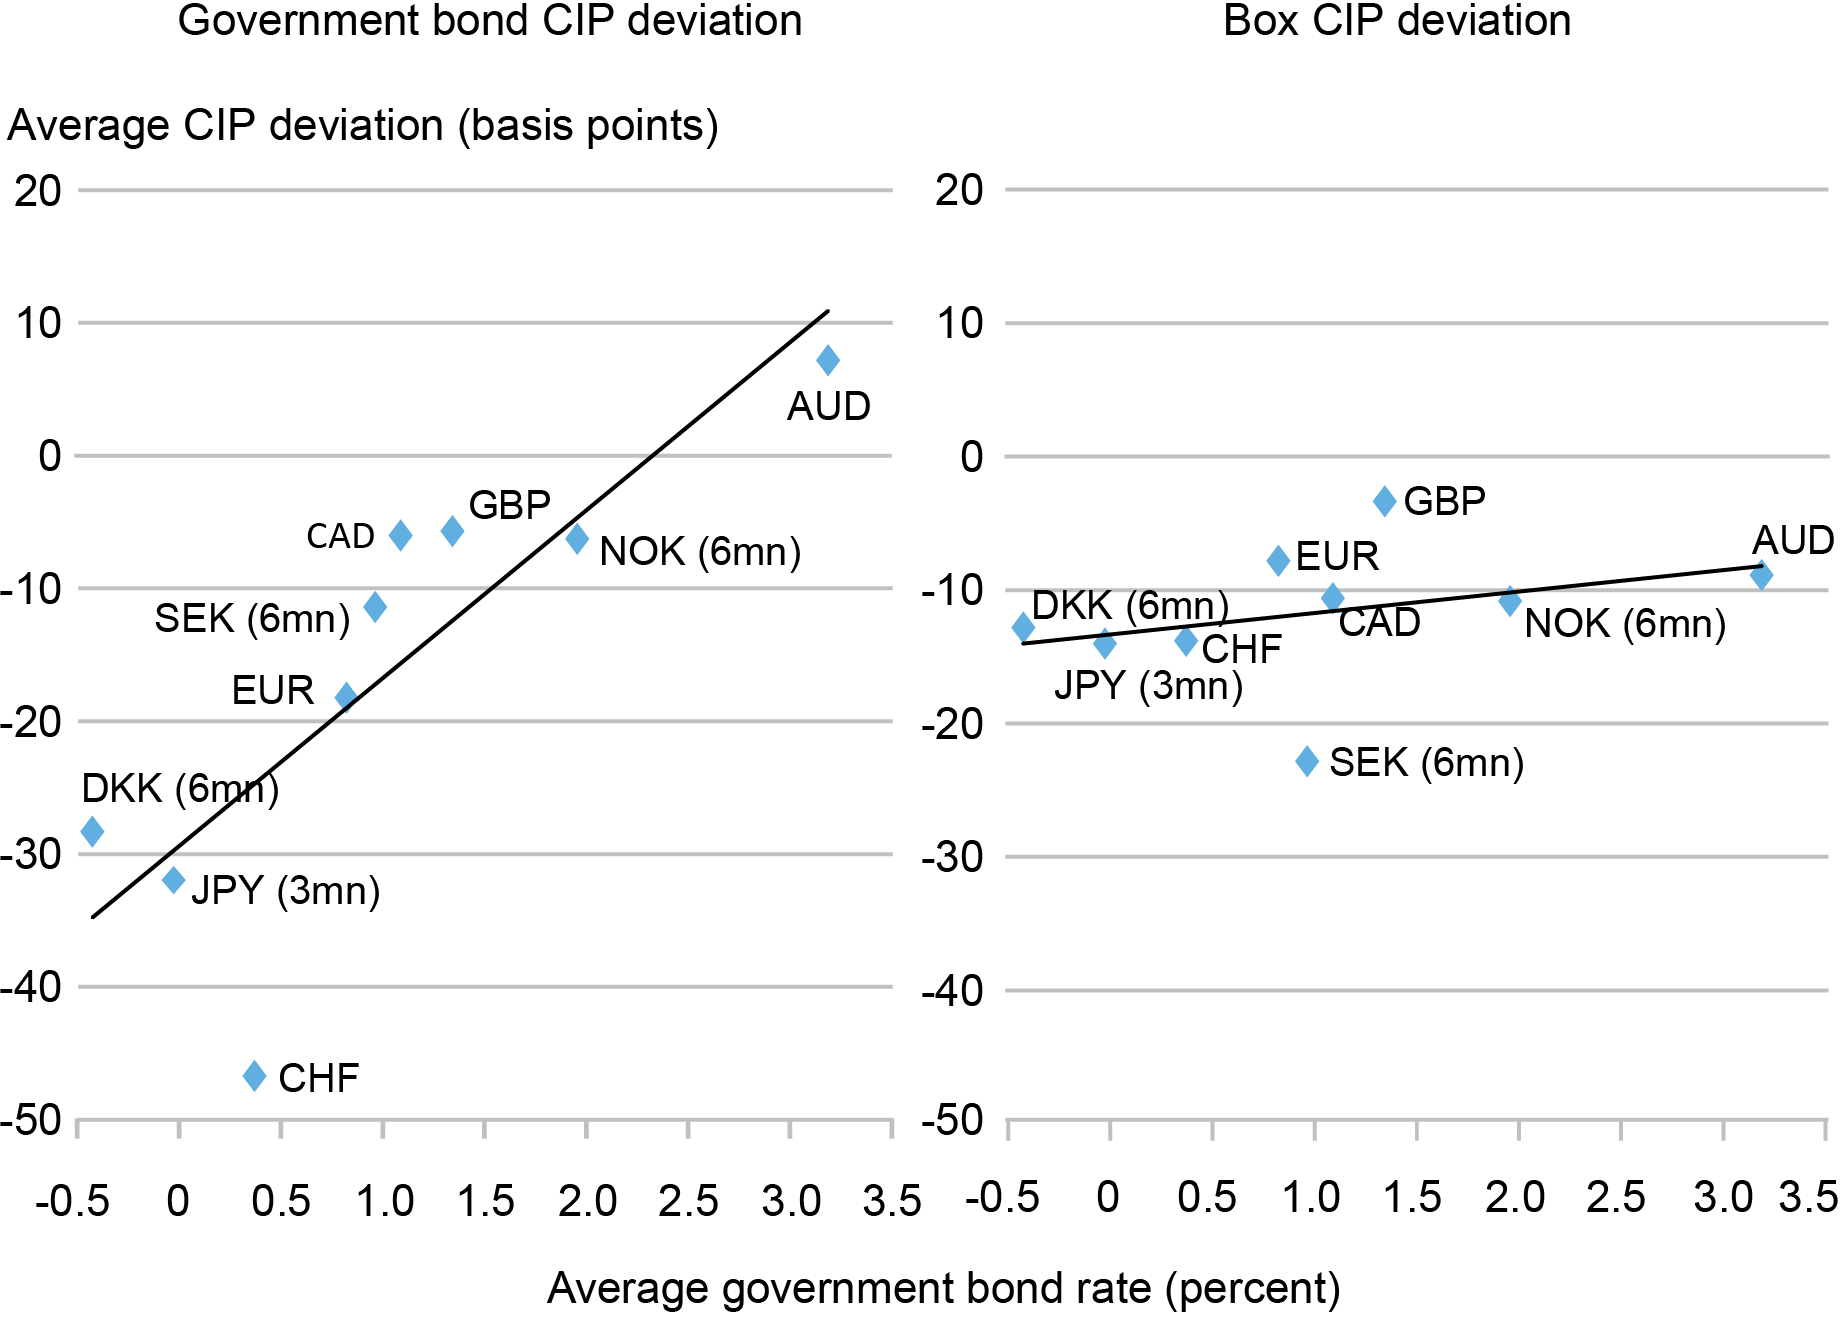 Two-panel Liberty Street Economics scatter plot chart showing the relationship between CIP deviations and the level of interest rates. The chart plots the average CIP deviation for government bond rates (left panel) and for box rates (right panel) against average government bond rates from January 2004 to July 2020 when data is available.